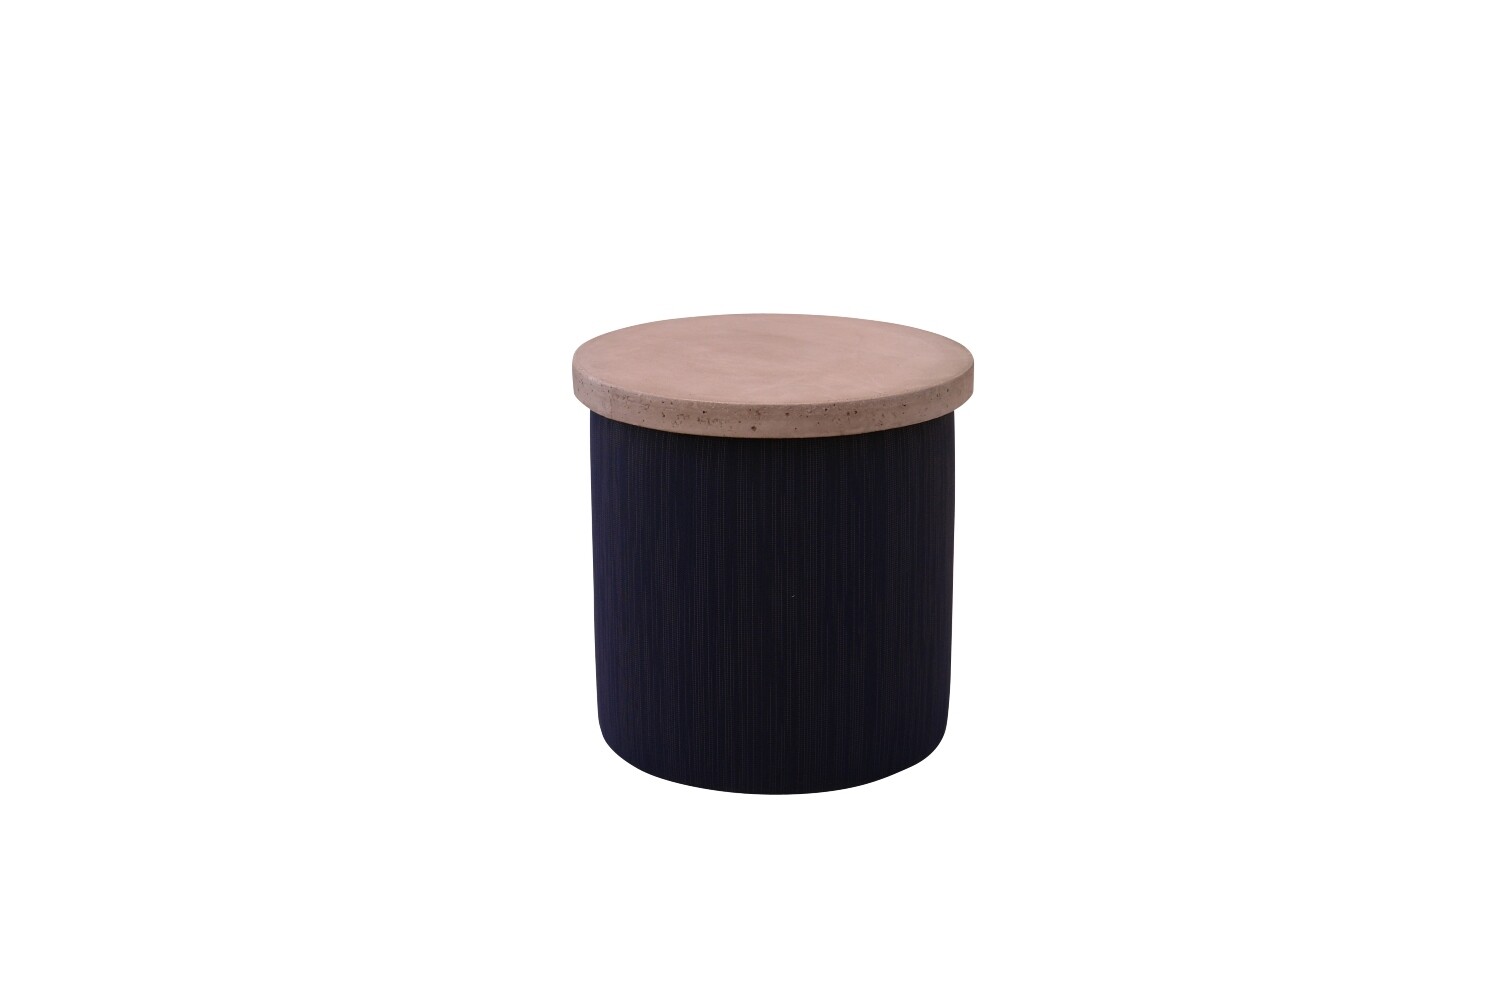 Resort Style Round Concrete Accent Table/Ottoman